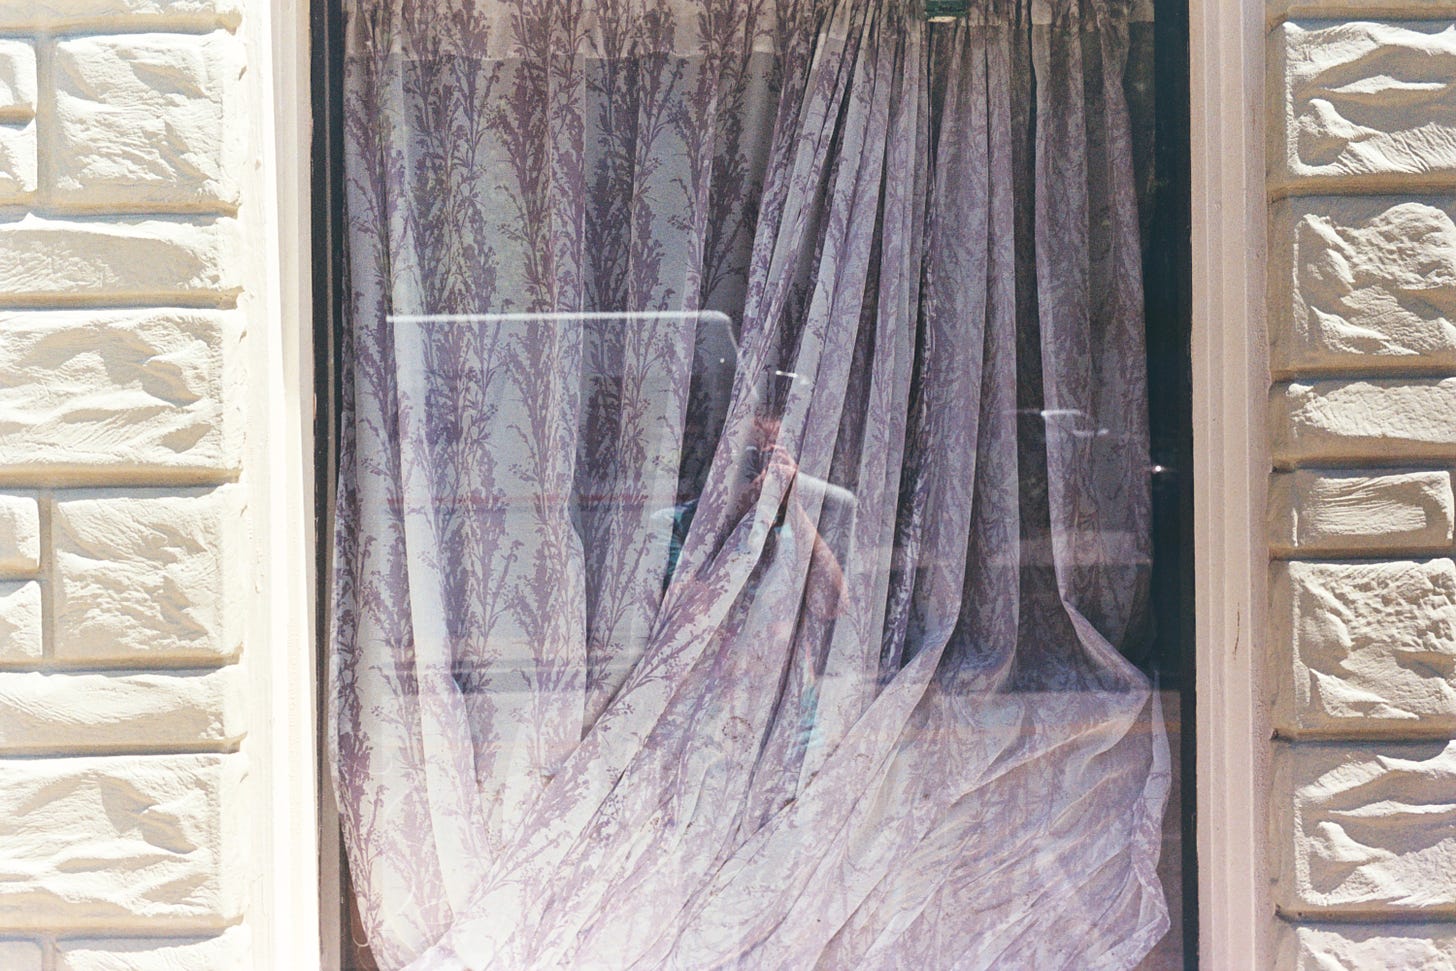 a self portrait in the reflection of an exterior window obscured on the inside with wrinkled floral drapes